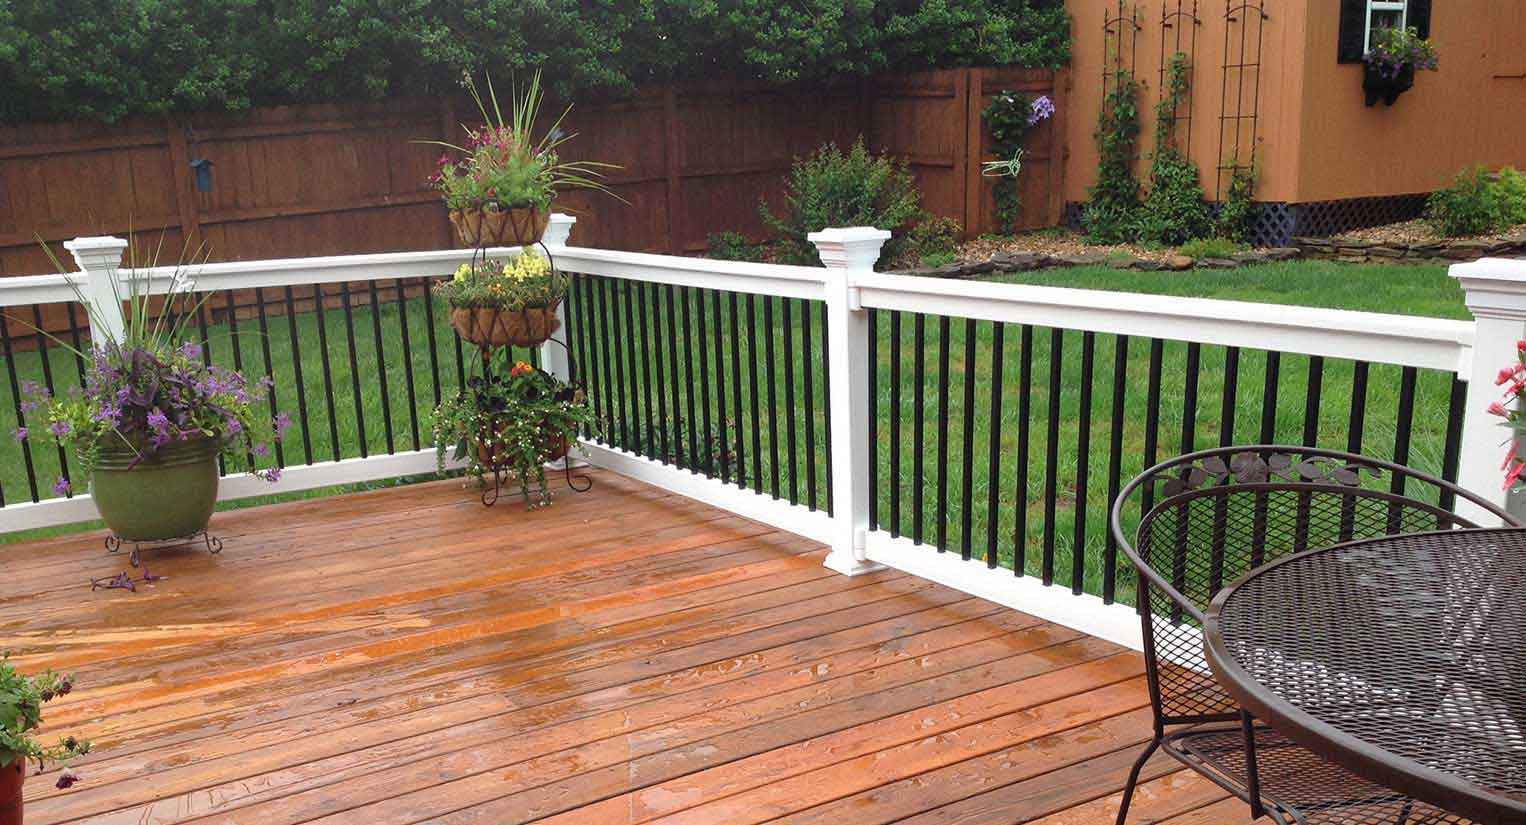 Timbertech Radiance Rails And Vinyl Xlm Deck In St Louis Wildwood Area Deck Railing Design Outdoor Stair Railing Decks And Porches